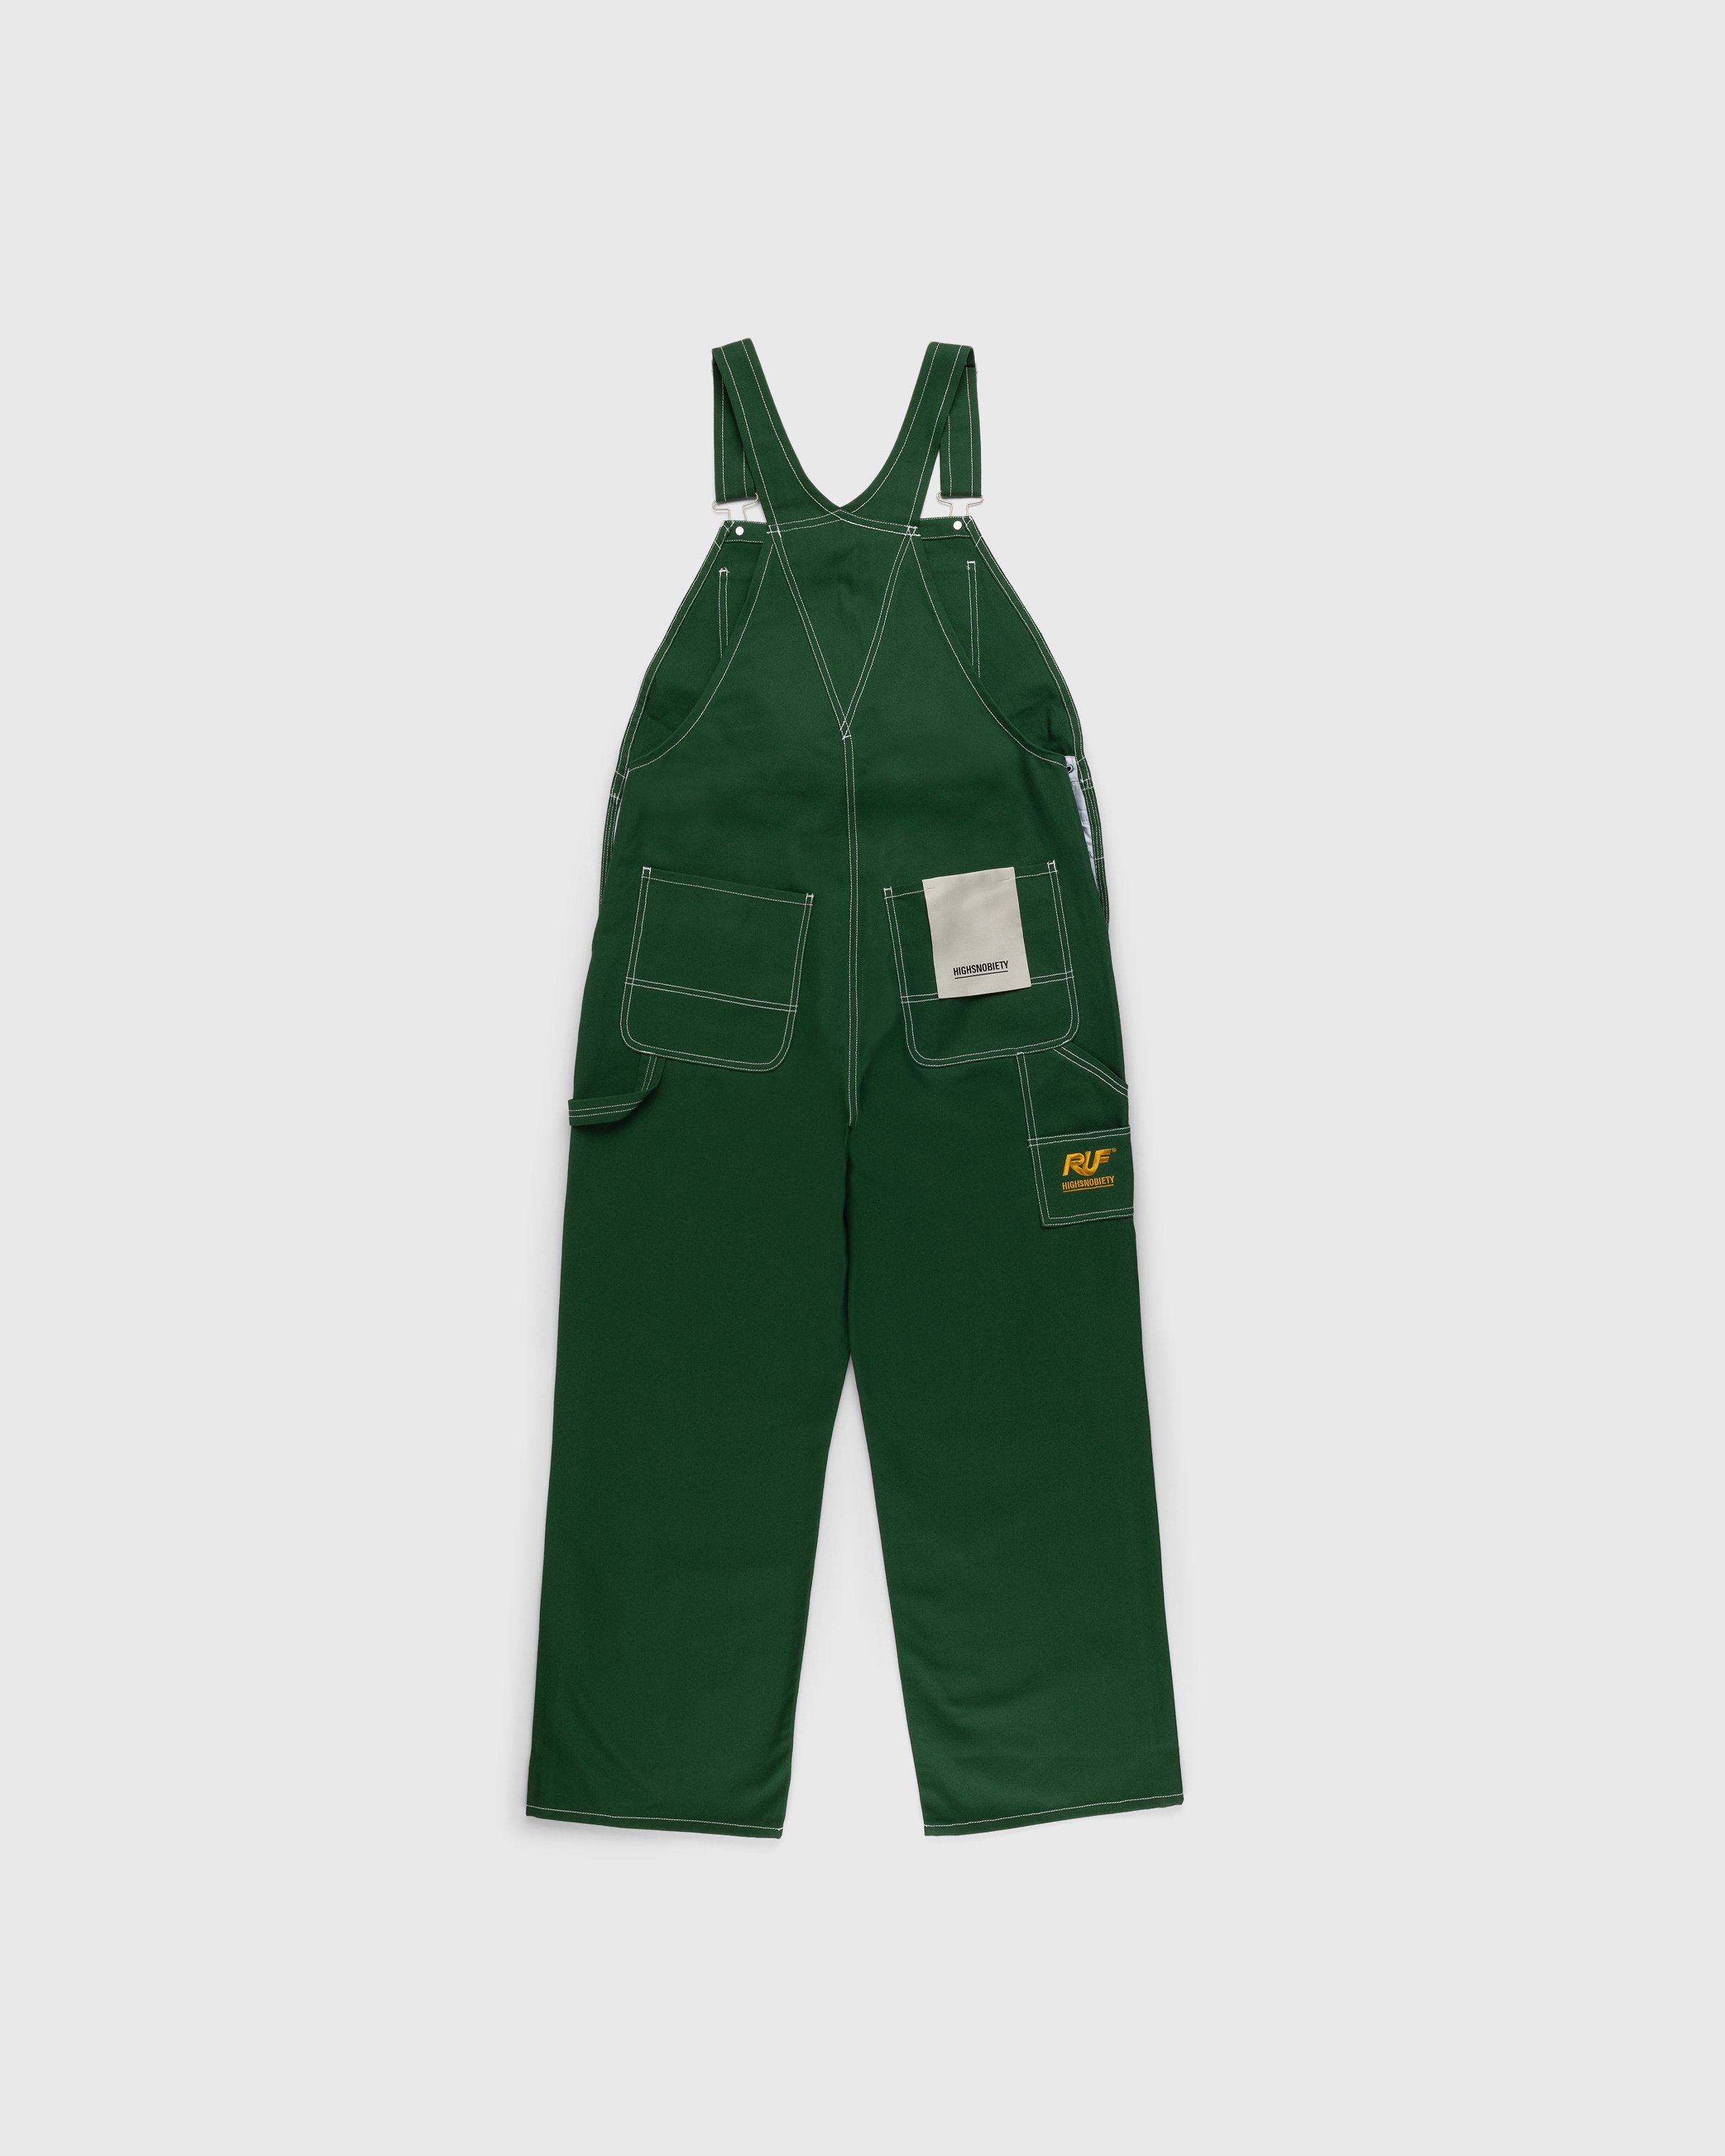 RUF x Highsnobiety - Cotton Overalls Green - Clothing - Green - Image 1